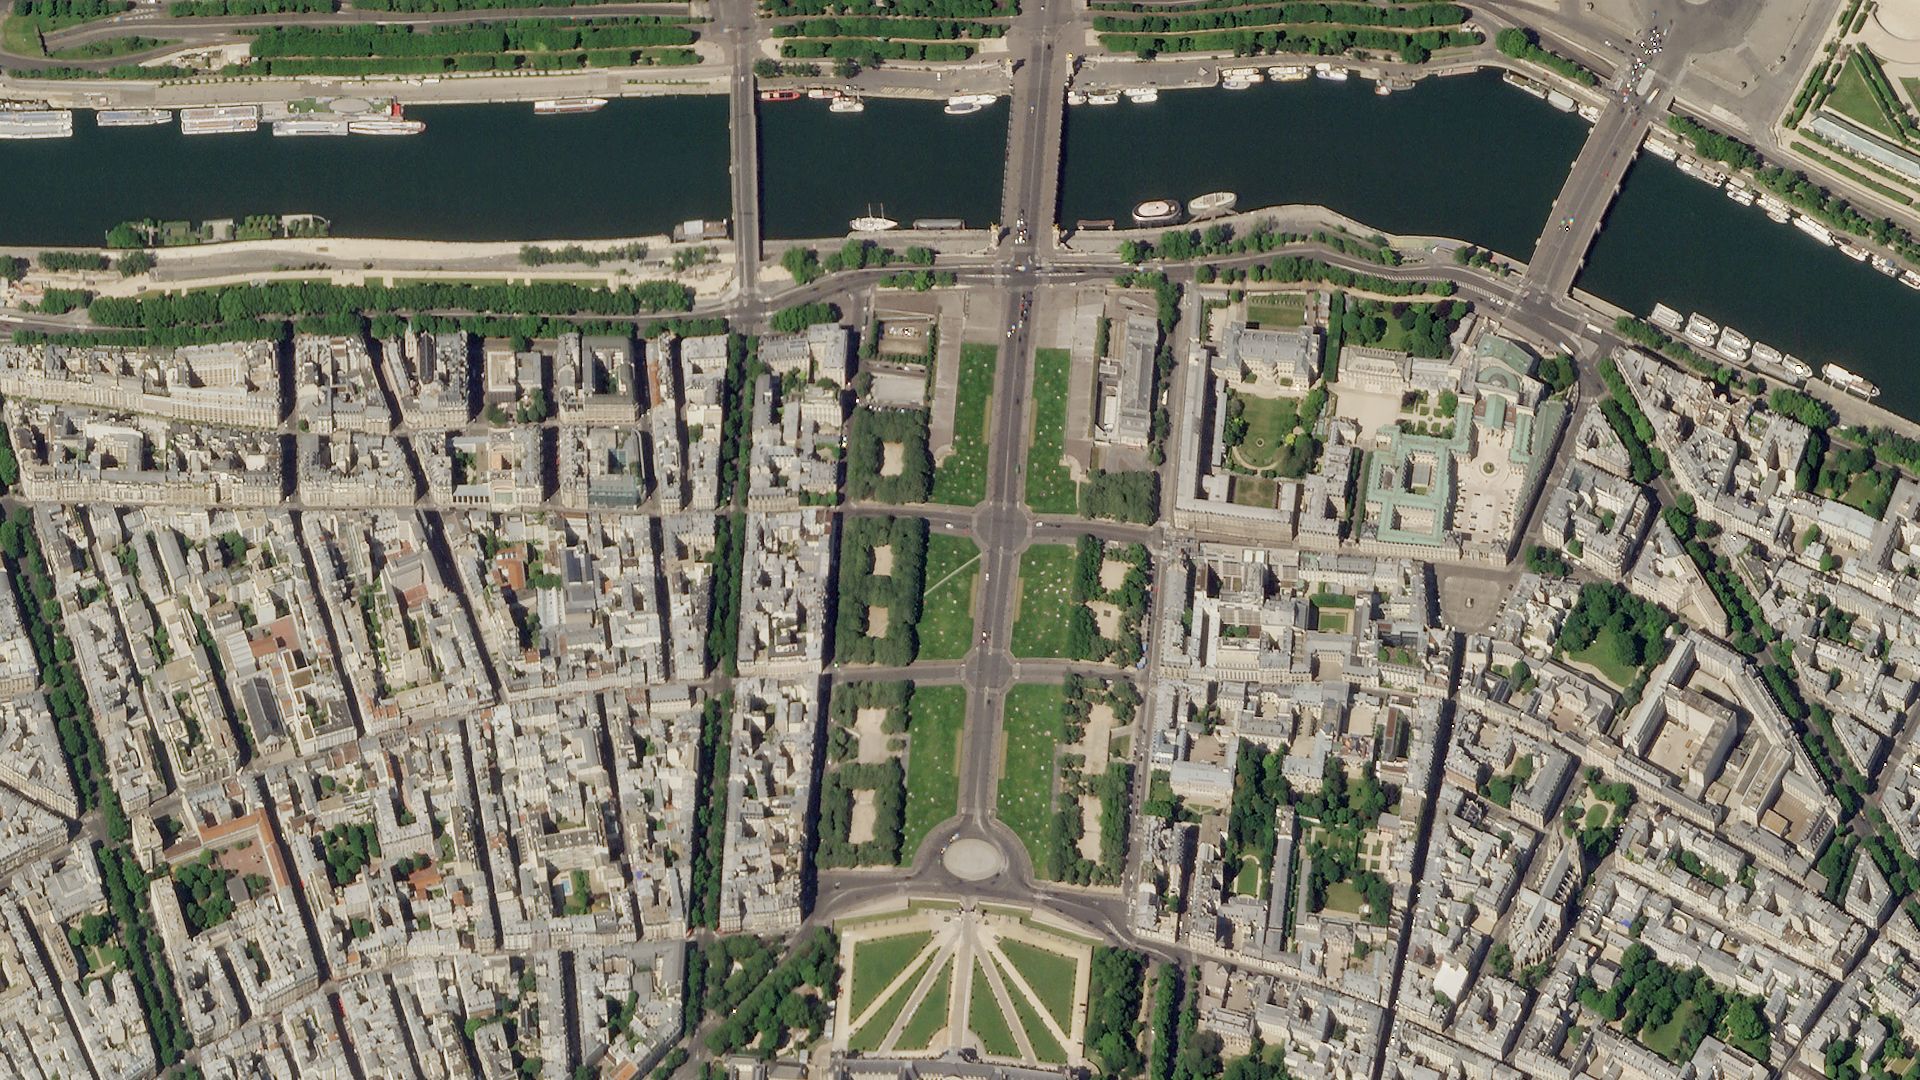 SkySat image of Paris, France on May 17, 2020 © 2020, Planet Labs Inc. All Rights Reserved.